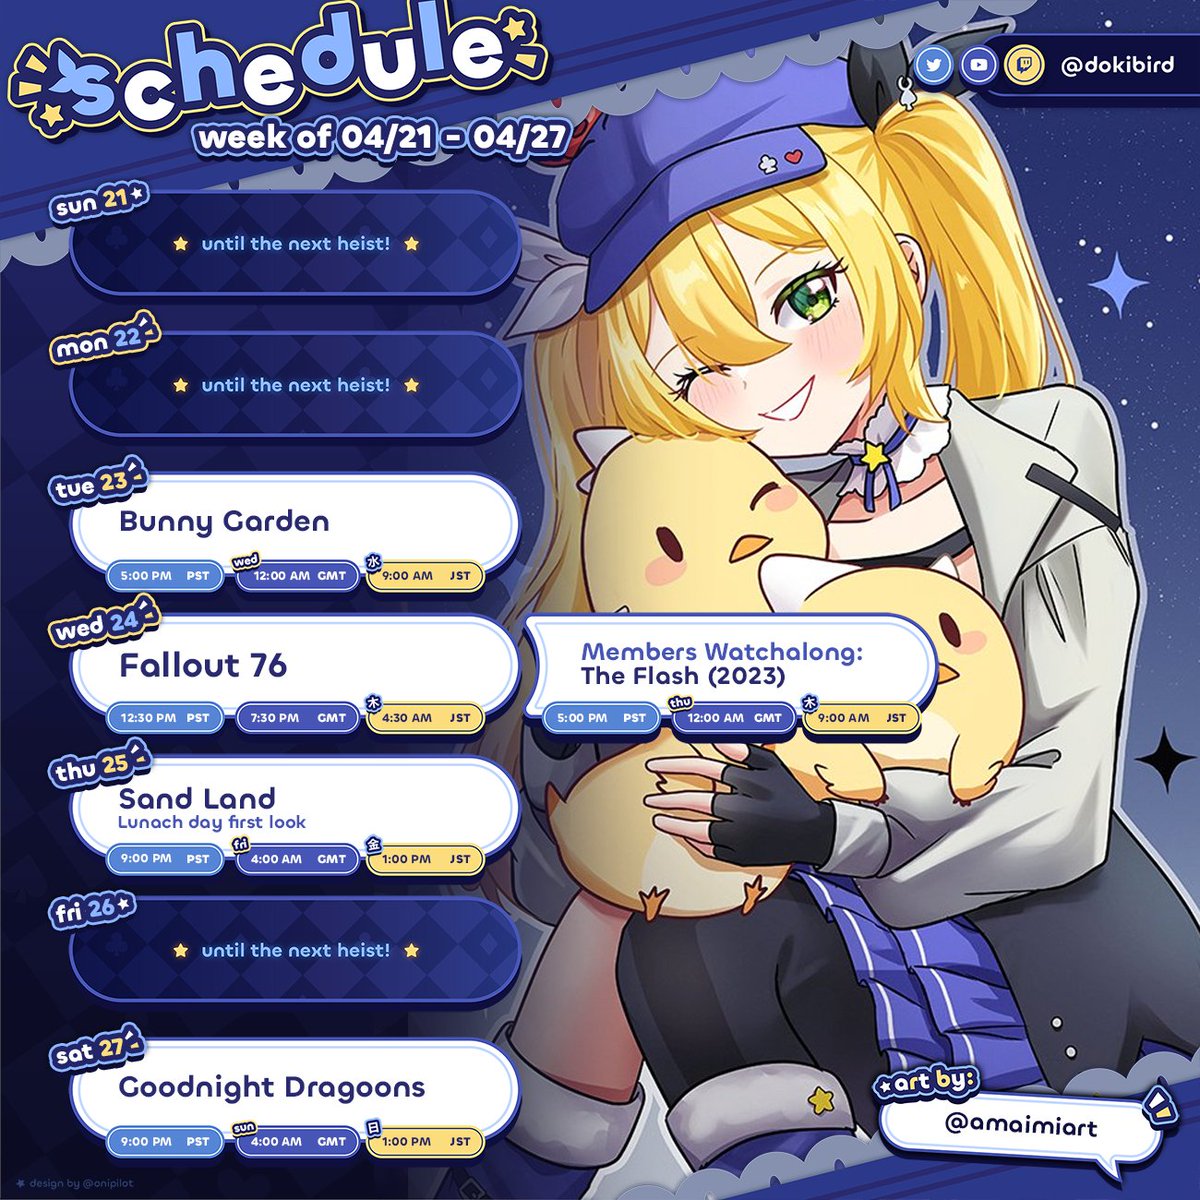 「Weekly Schedule & Tags」
APRIL 21st - APRIL 27th
CONTEST: #DokiWaifuCupContest
GENERAL: #Dokibird
LIVE: #Birdseaters
ART: #DokiGallery / NSFW: #Lewdtomato
COSPLAY: #Dokigram
MERCH: #Dokishrine
FAN NAME: Dragoons
CLIPS: #Dokiclips
PROPS/THUMBNAIL: #Propbird
MEMES: #jkterjter